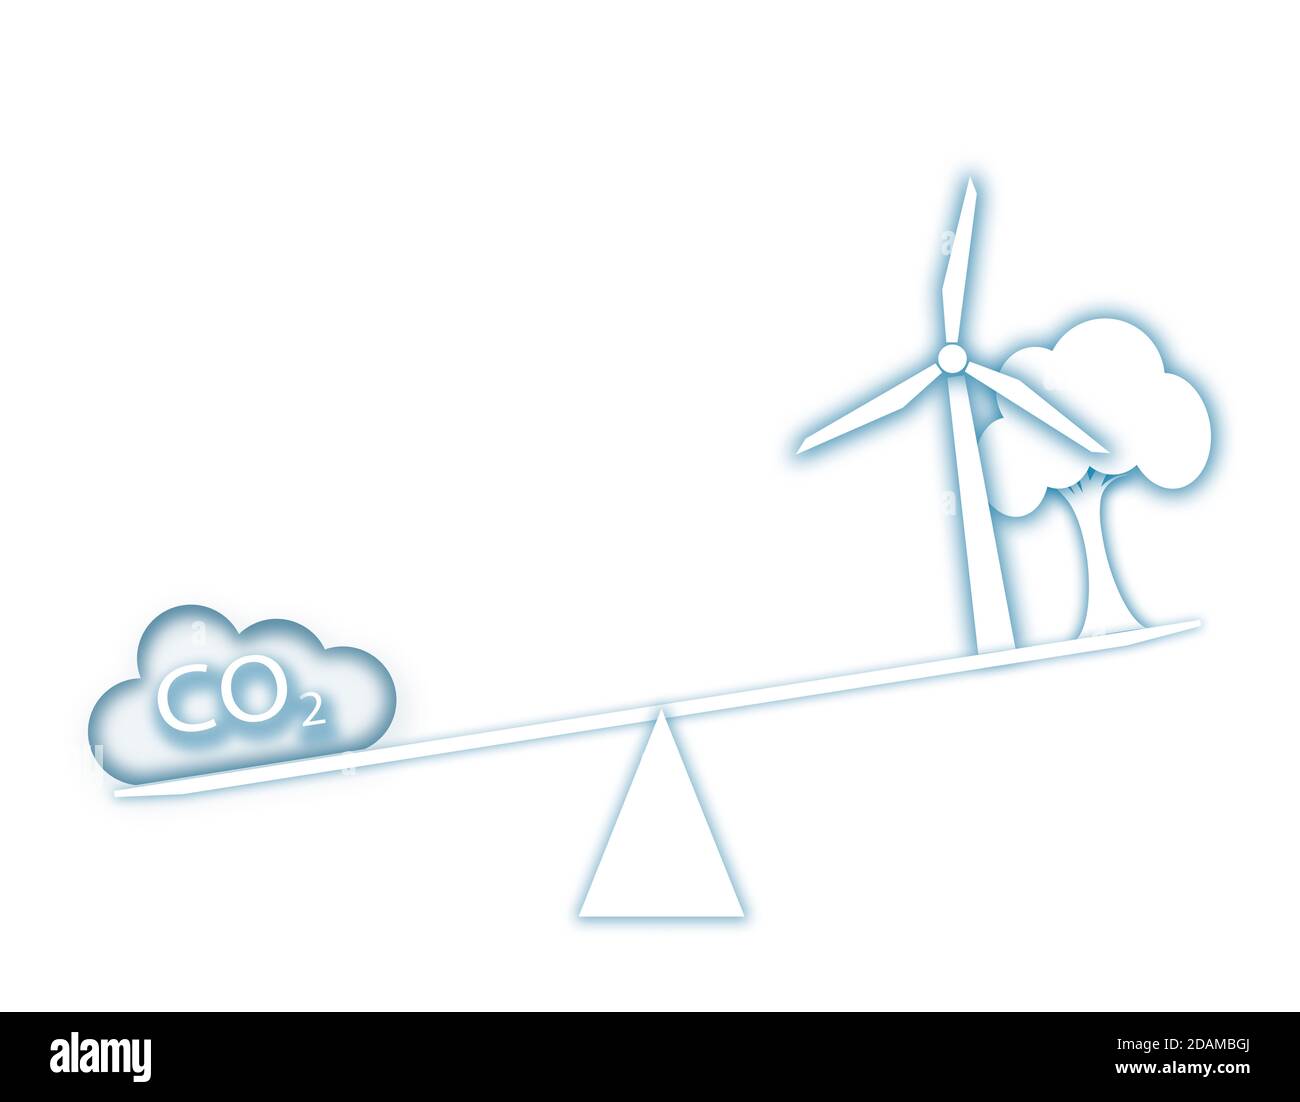 Scales with carbon cloud, turbine and tree, illustration. Stock Photo